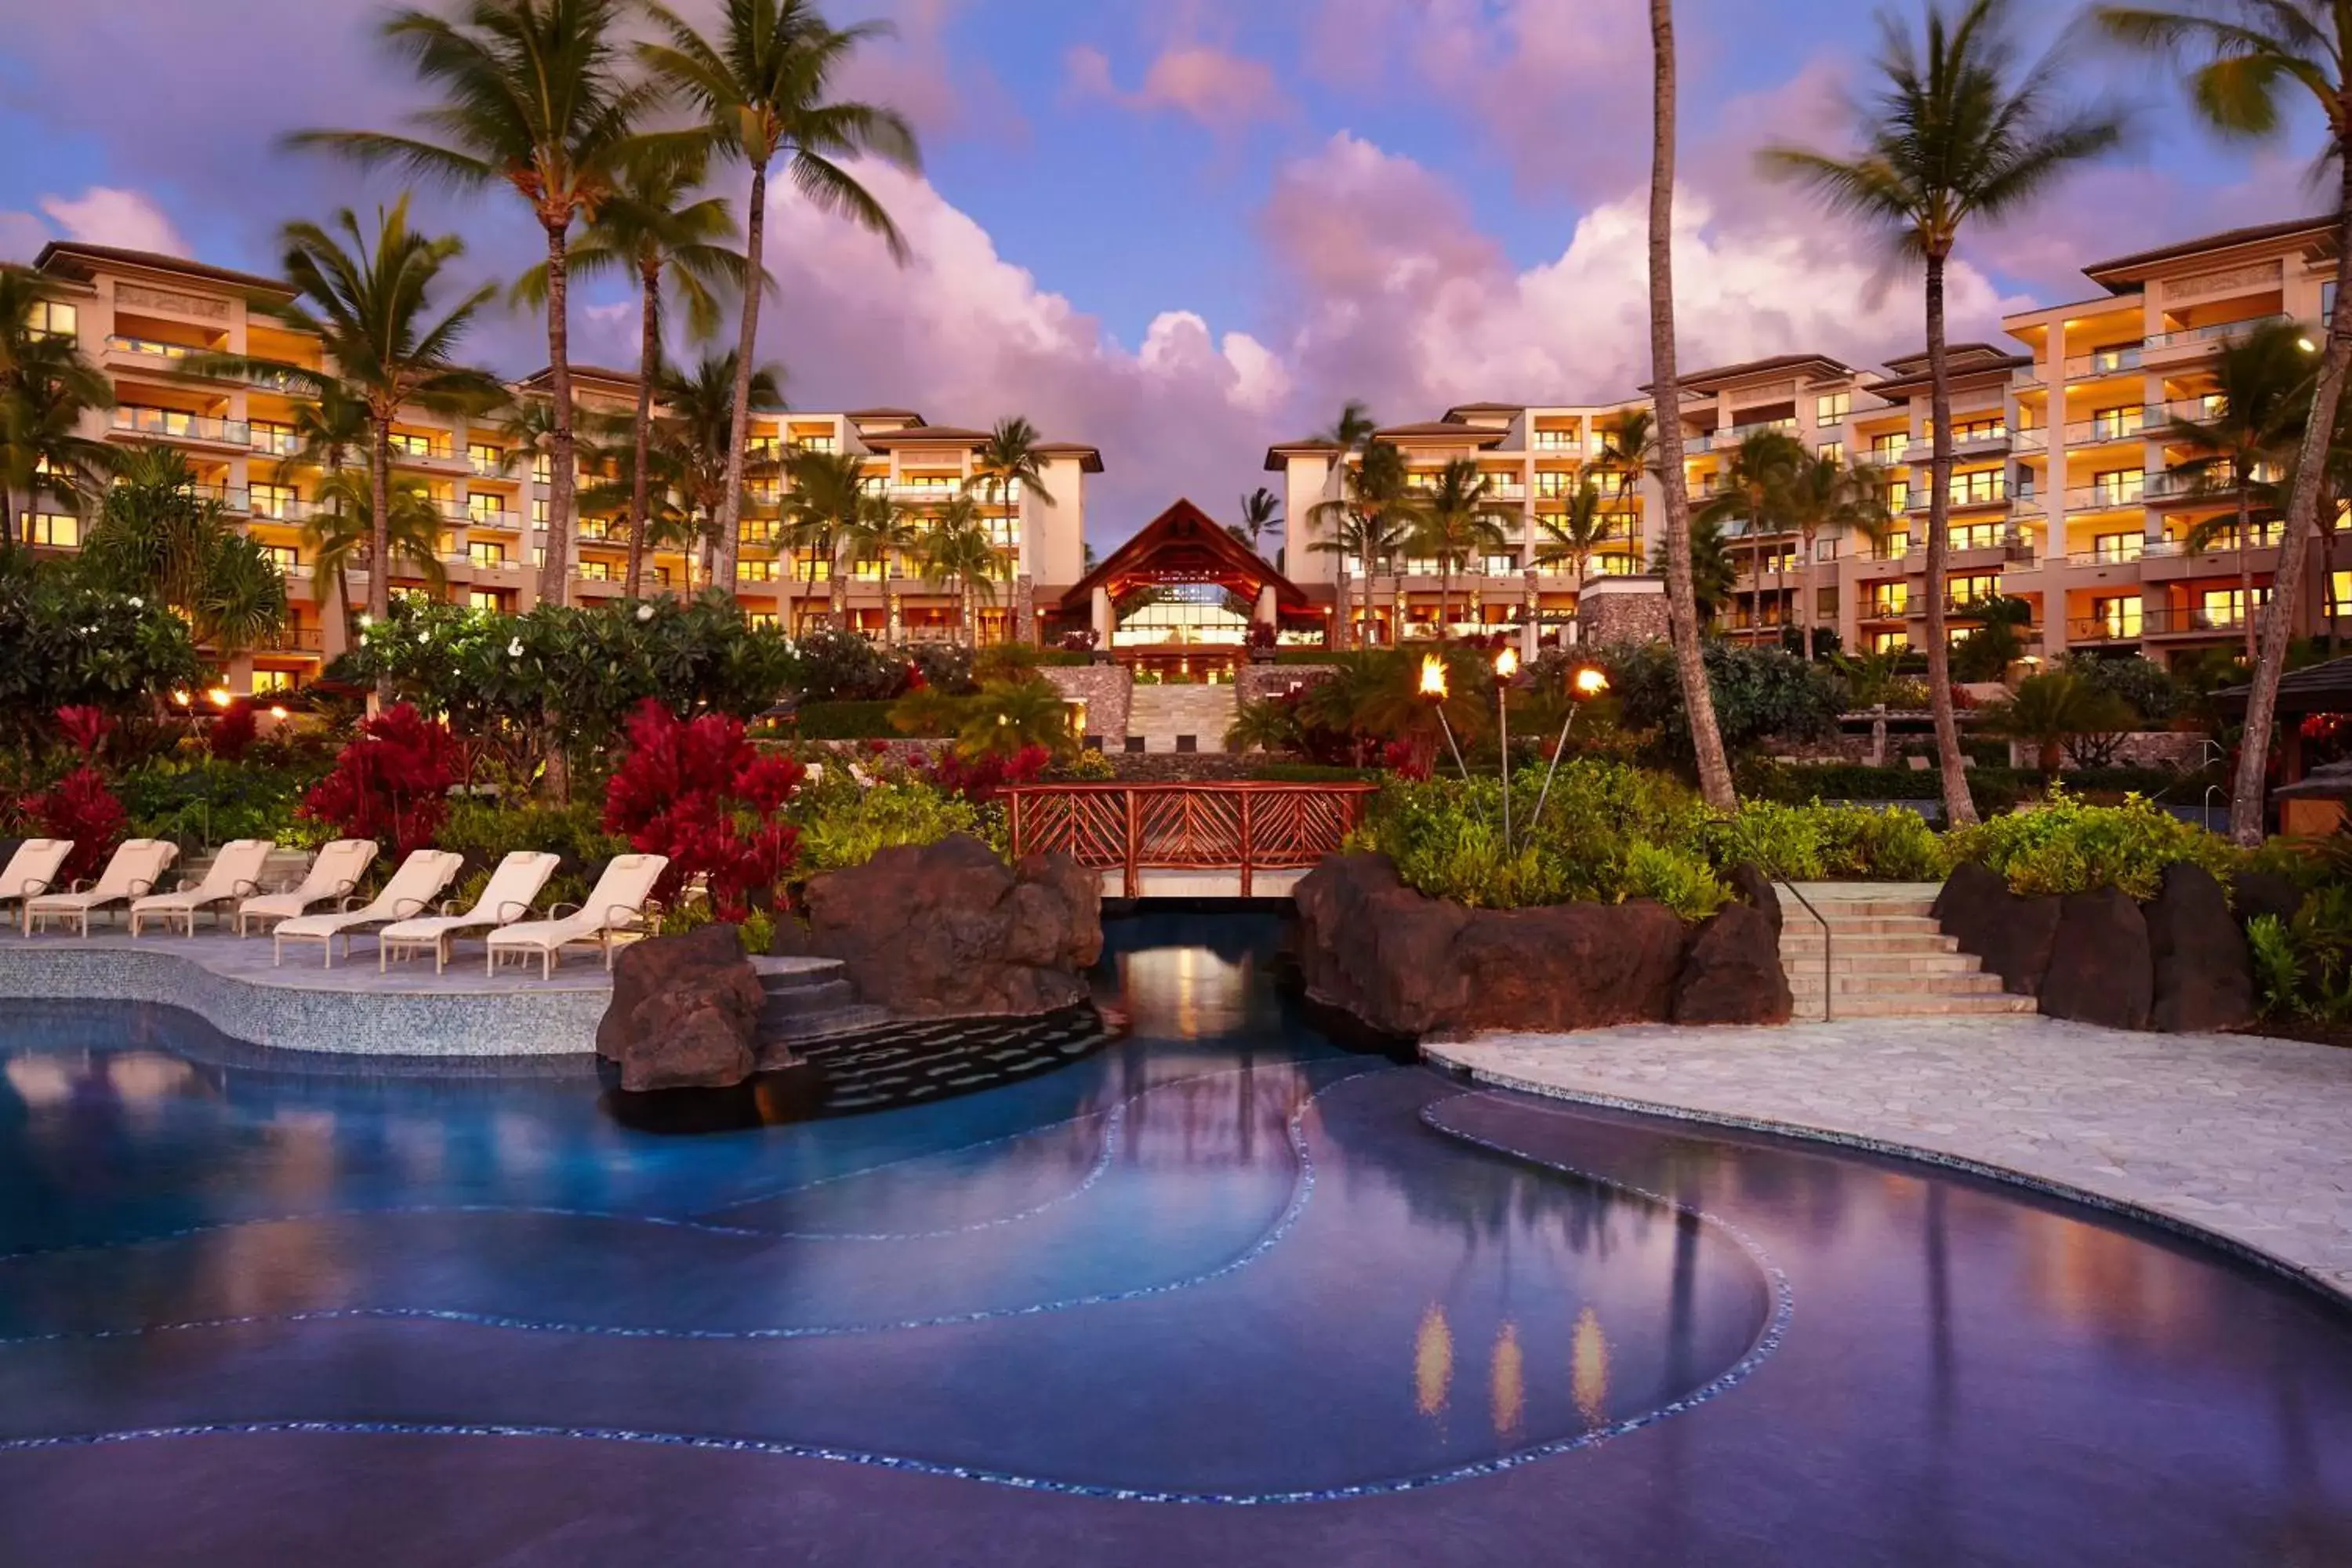 Property building, Swimming Pool in Montage Kapalua Bay